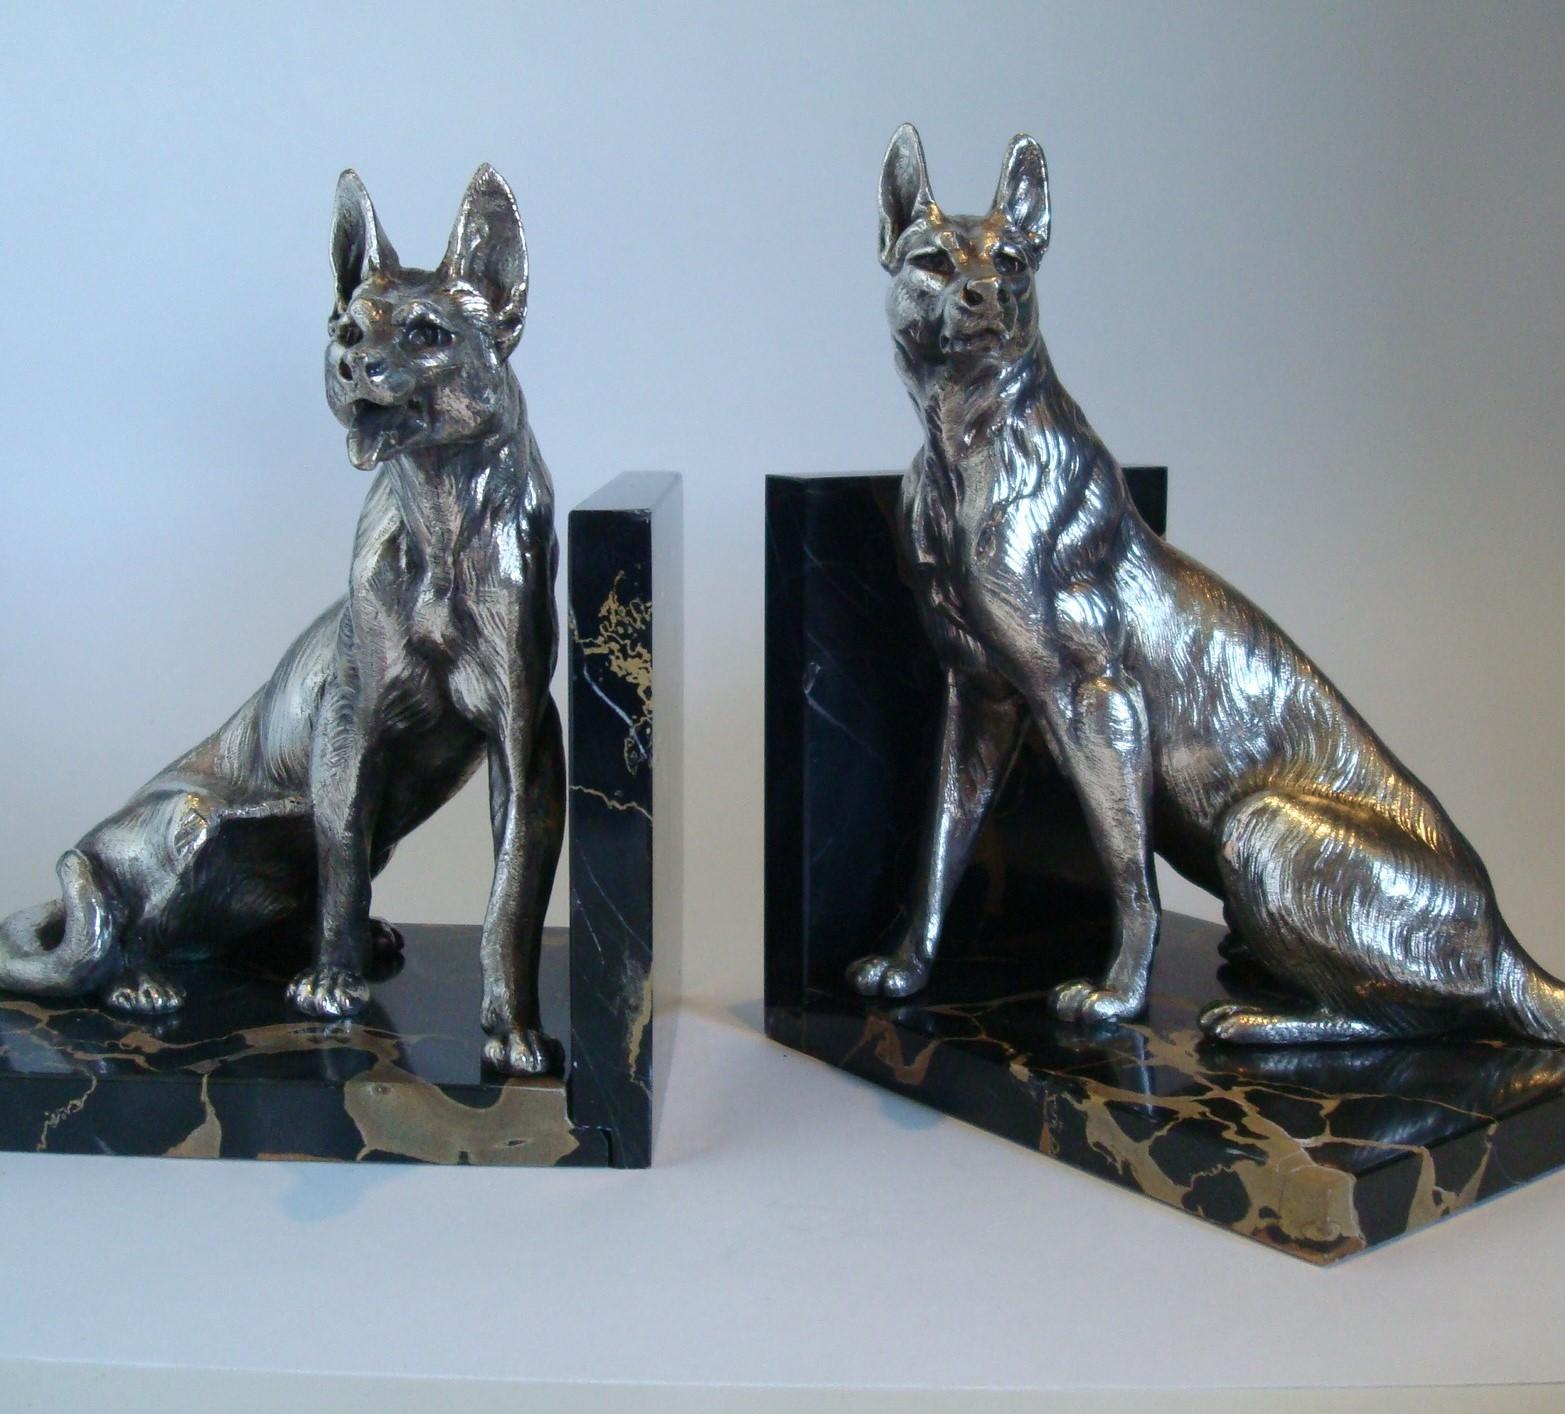 French German Shepherd Dog Sculpture Bookends by Louis-Albert Carvin